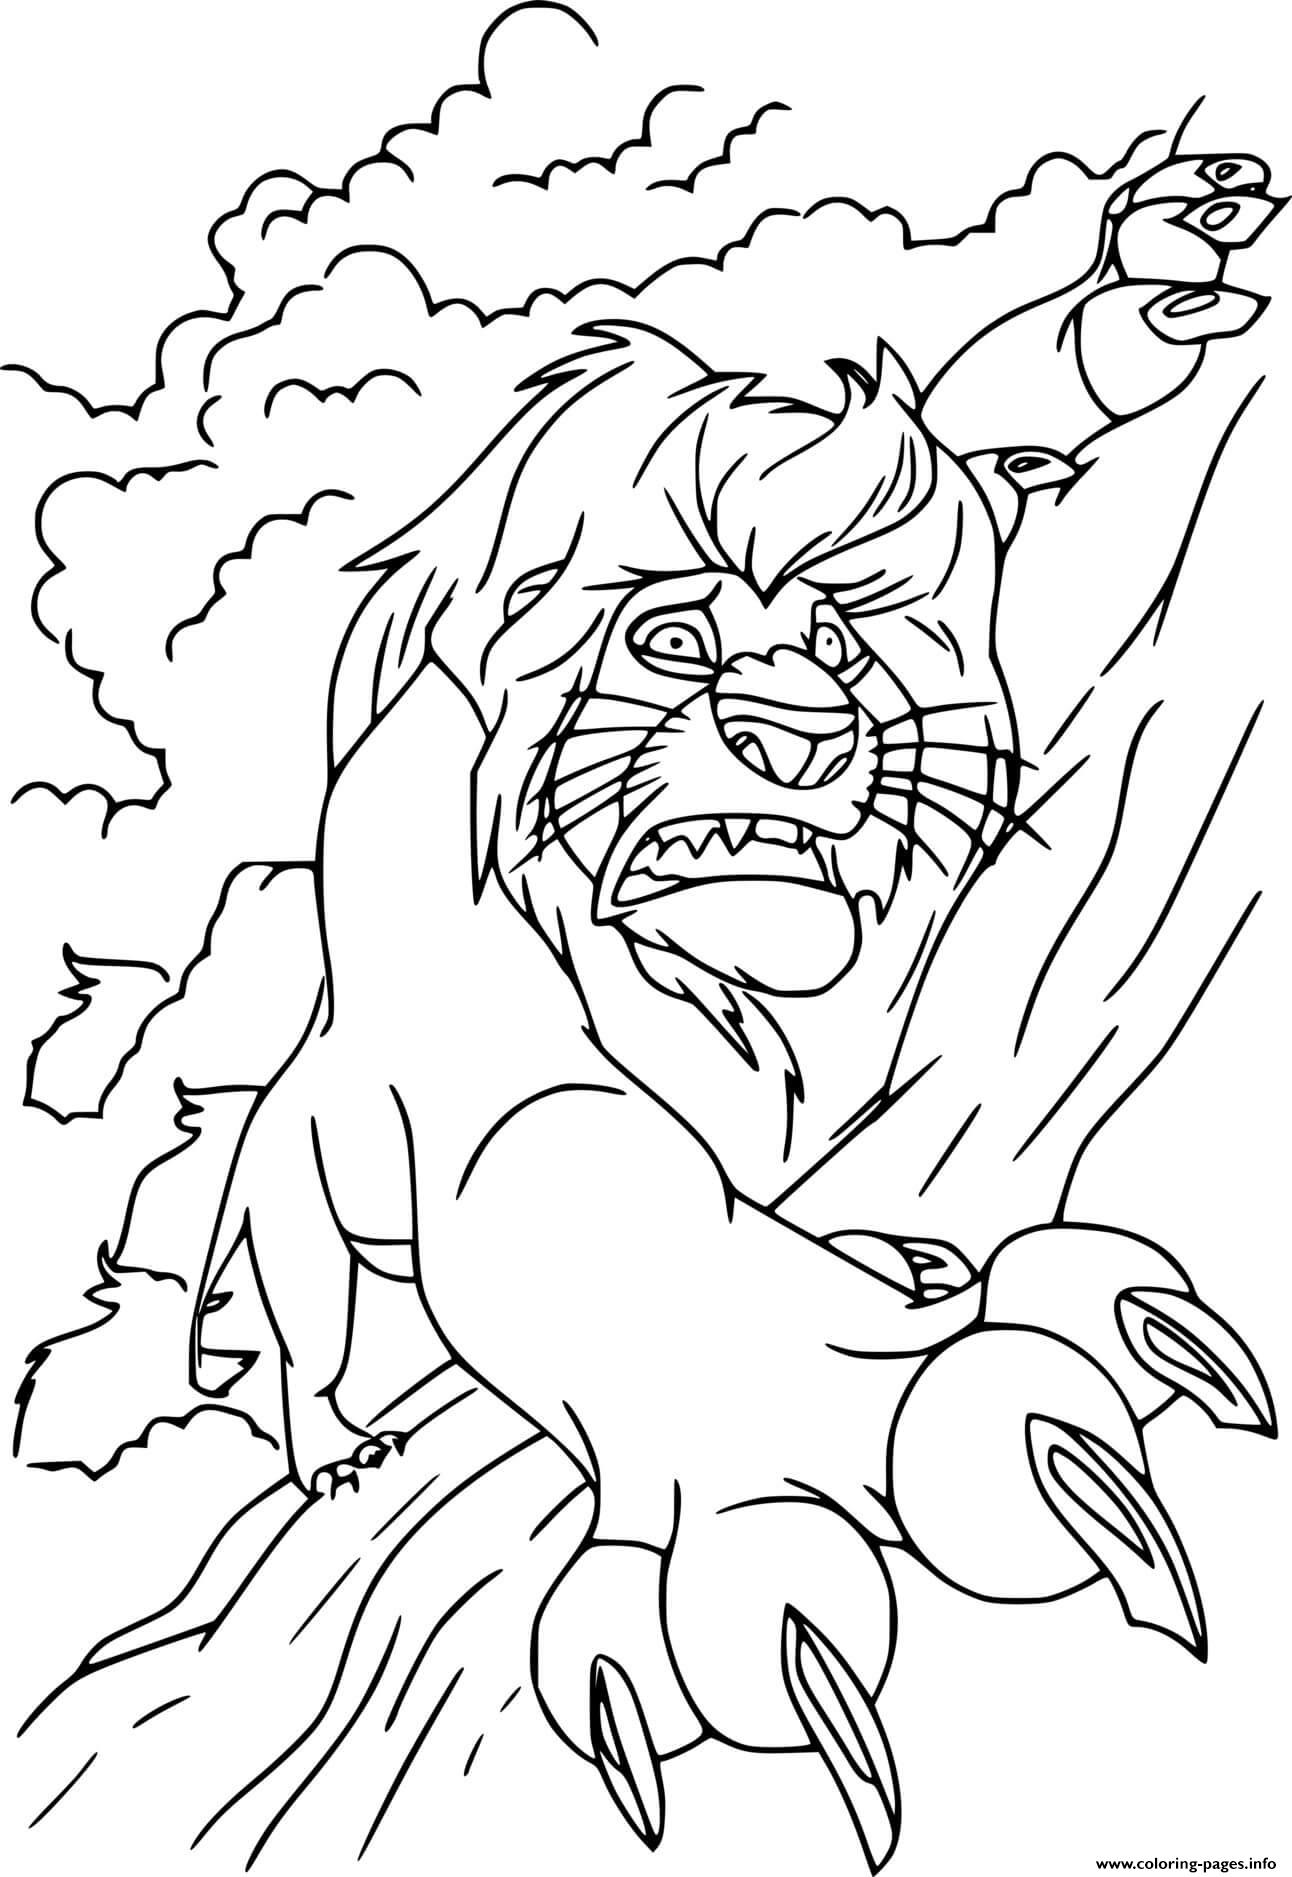 Mufasa Fell Off The Cliff coloring